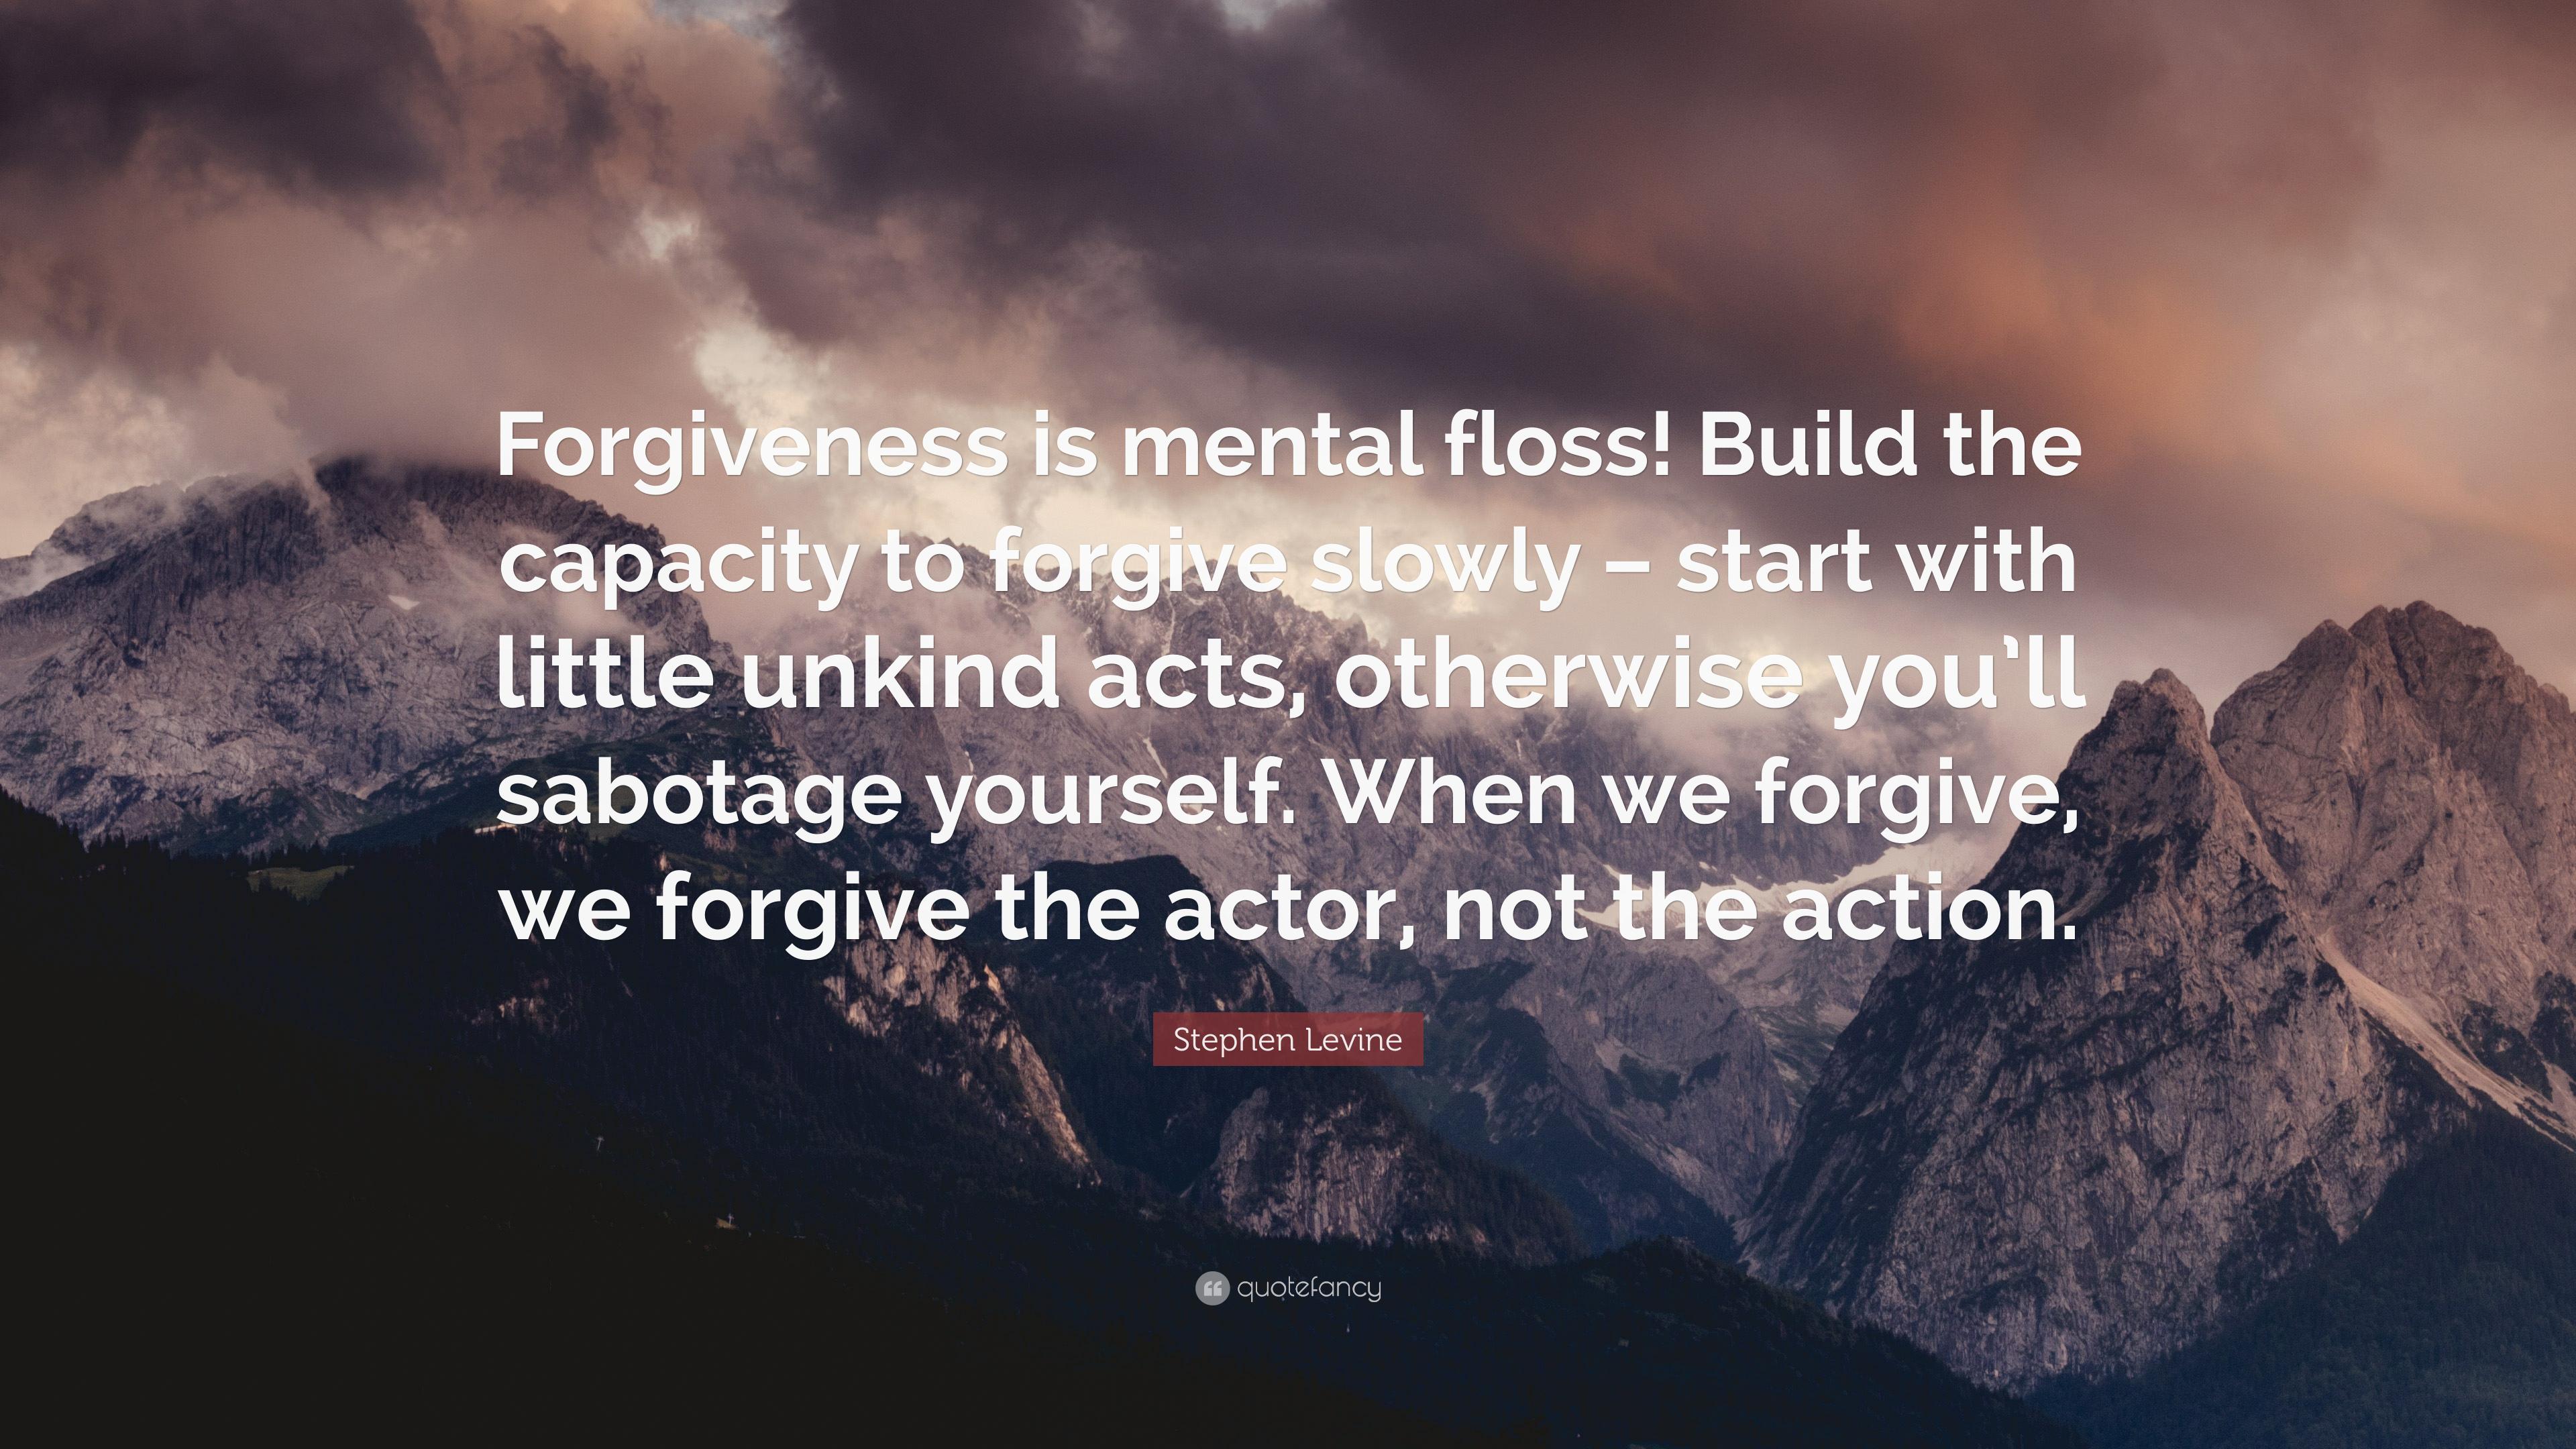 Stephen Levine Quote: “Forgiveness is mental floss! Build